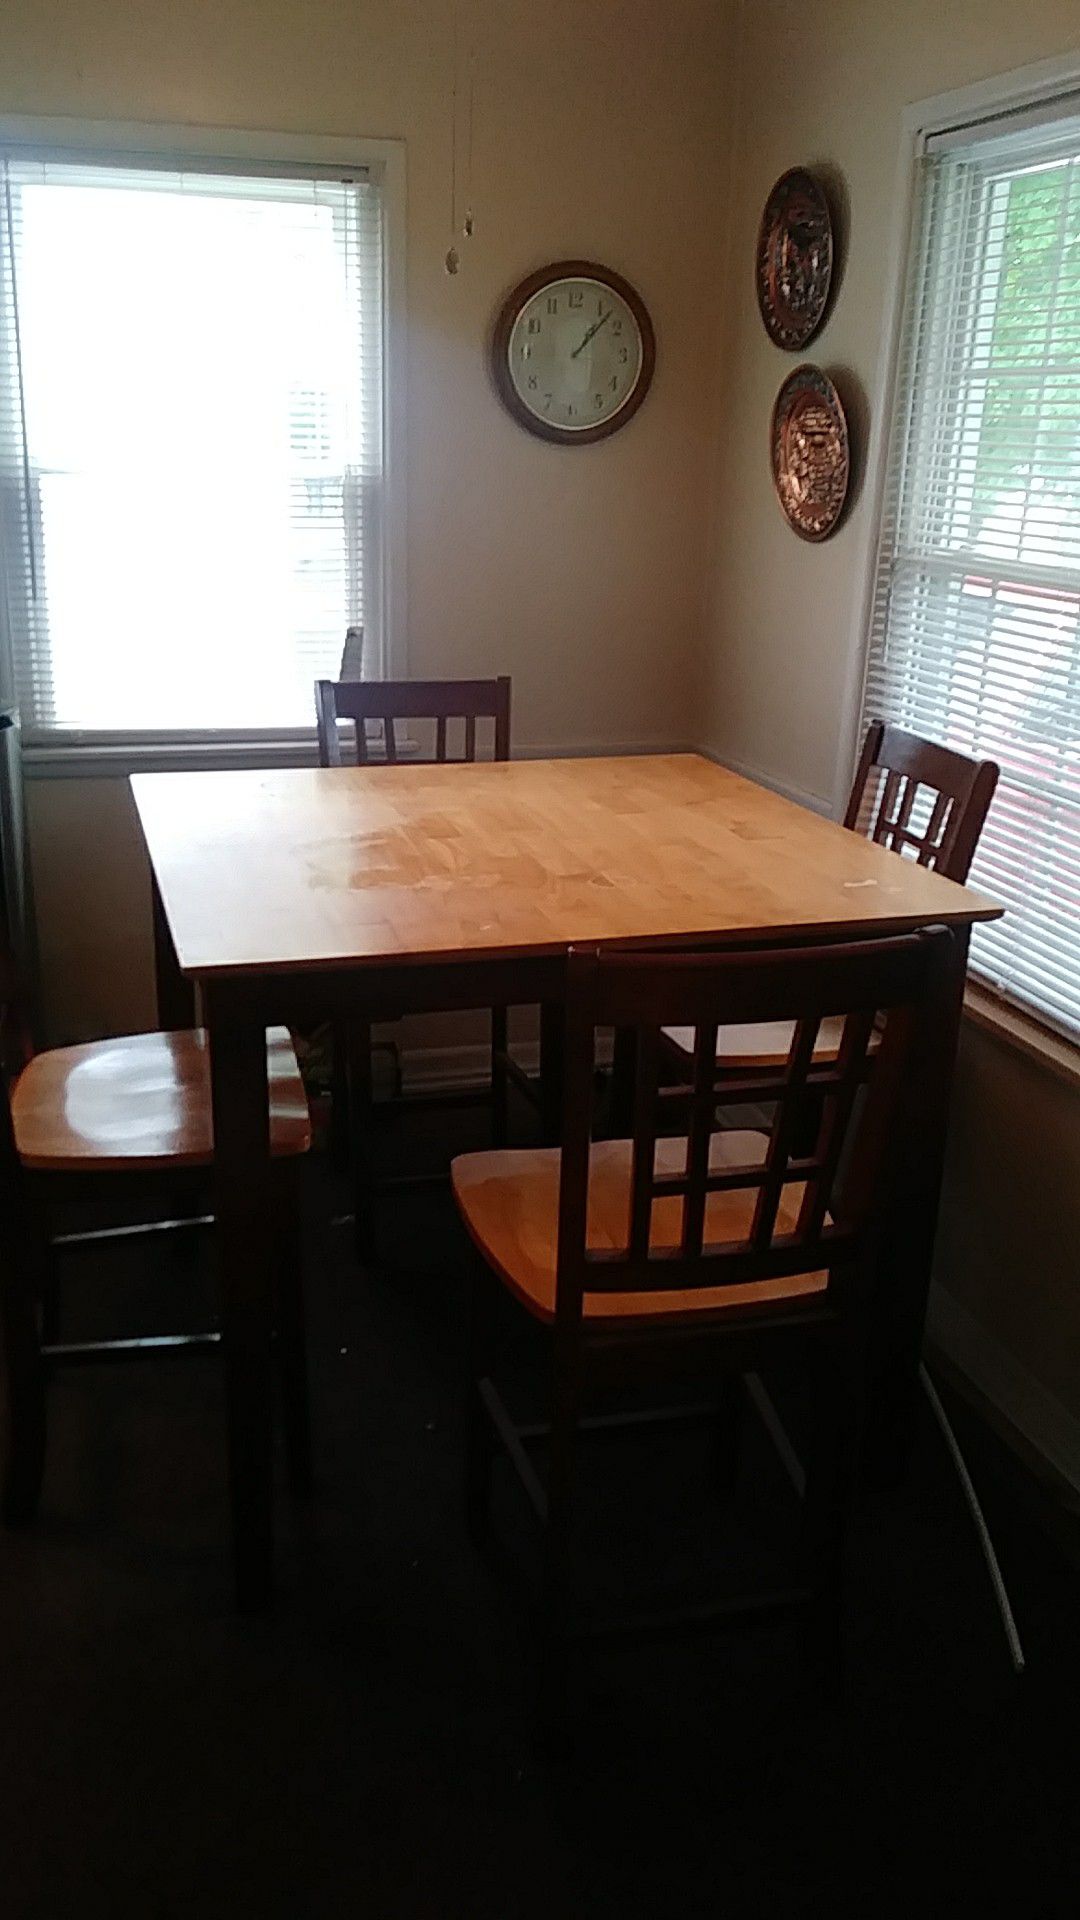 Kitchen table 4 chairs nice